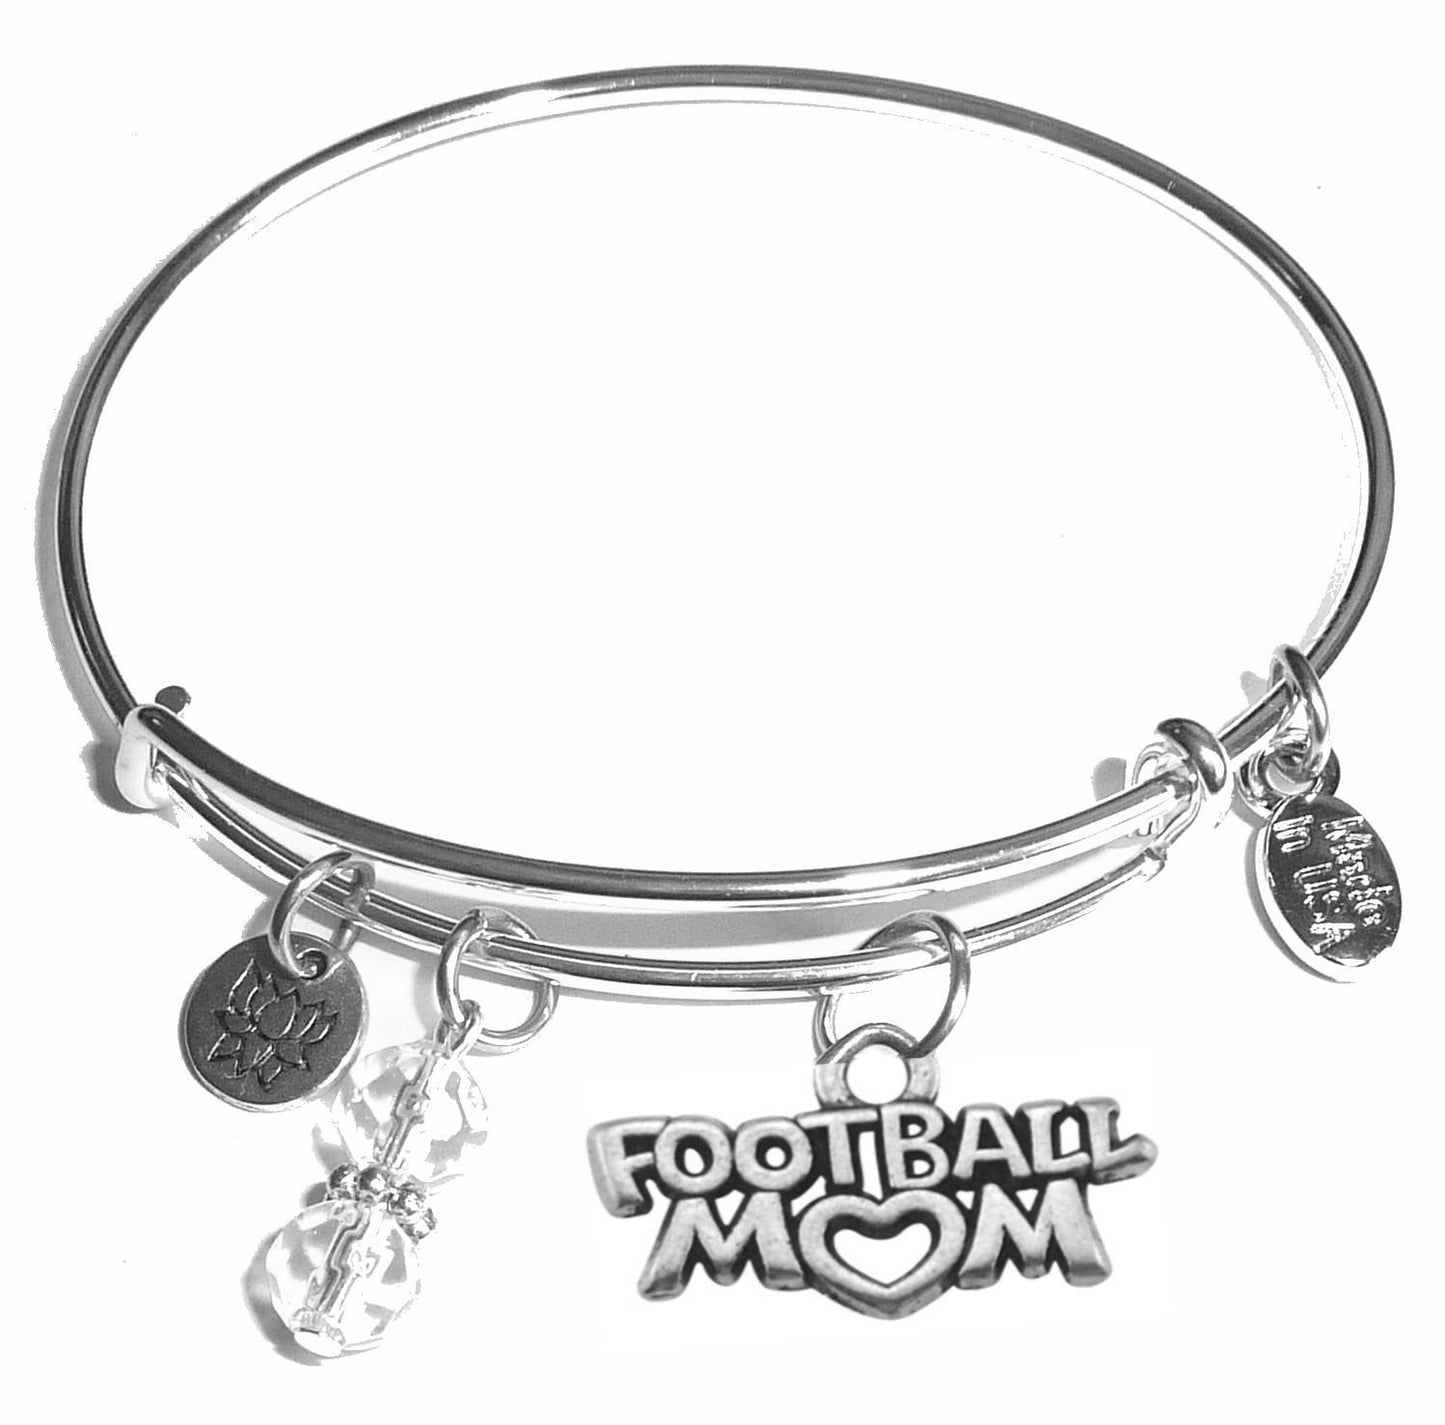 Football Mom - Message Bangle Bracelet - Expandable Wire Bracelet– Comes in a gift box